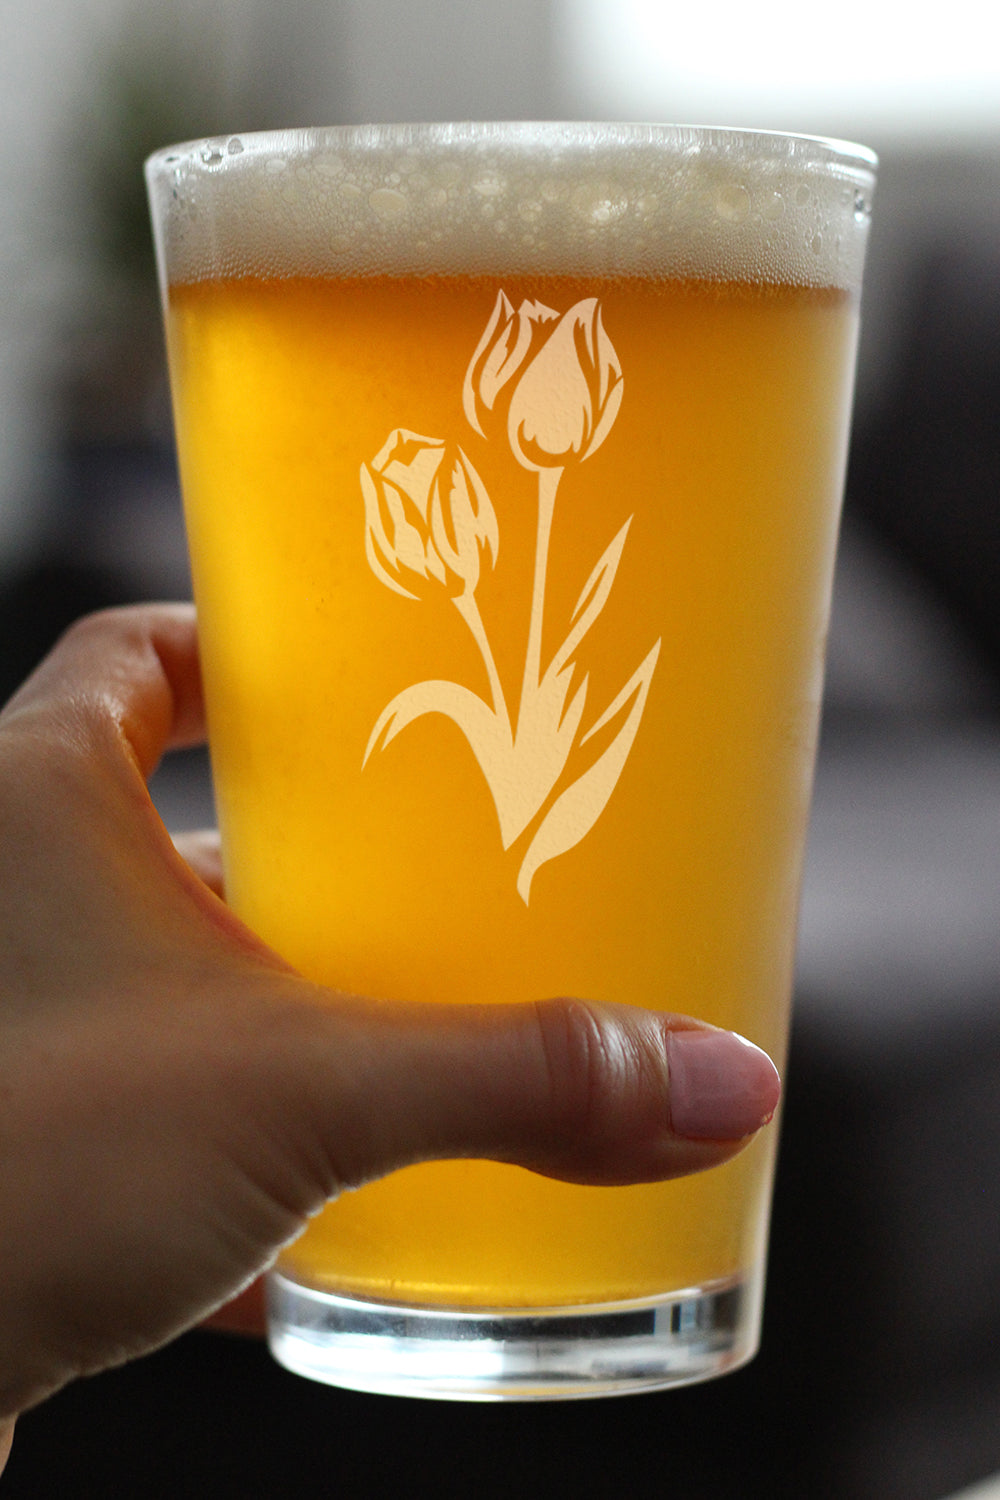 Tulip Pint Glass for Beer - Floral Themed Decor and Gifts for Flower Lovers - 16 oz Glasses